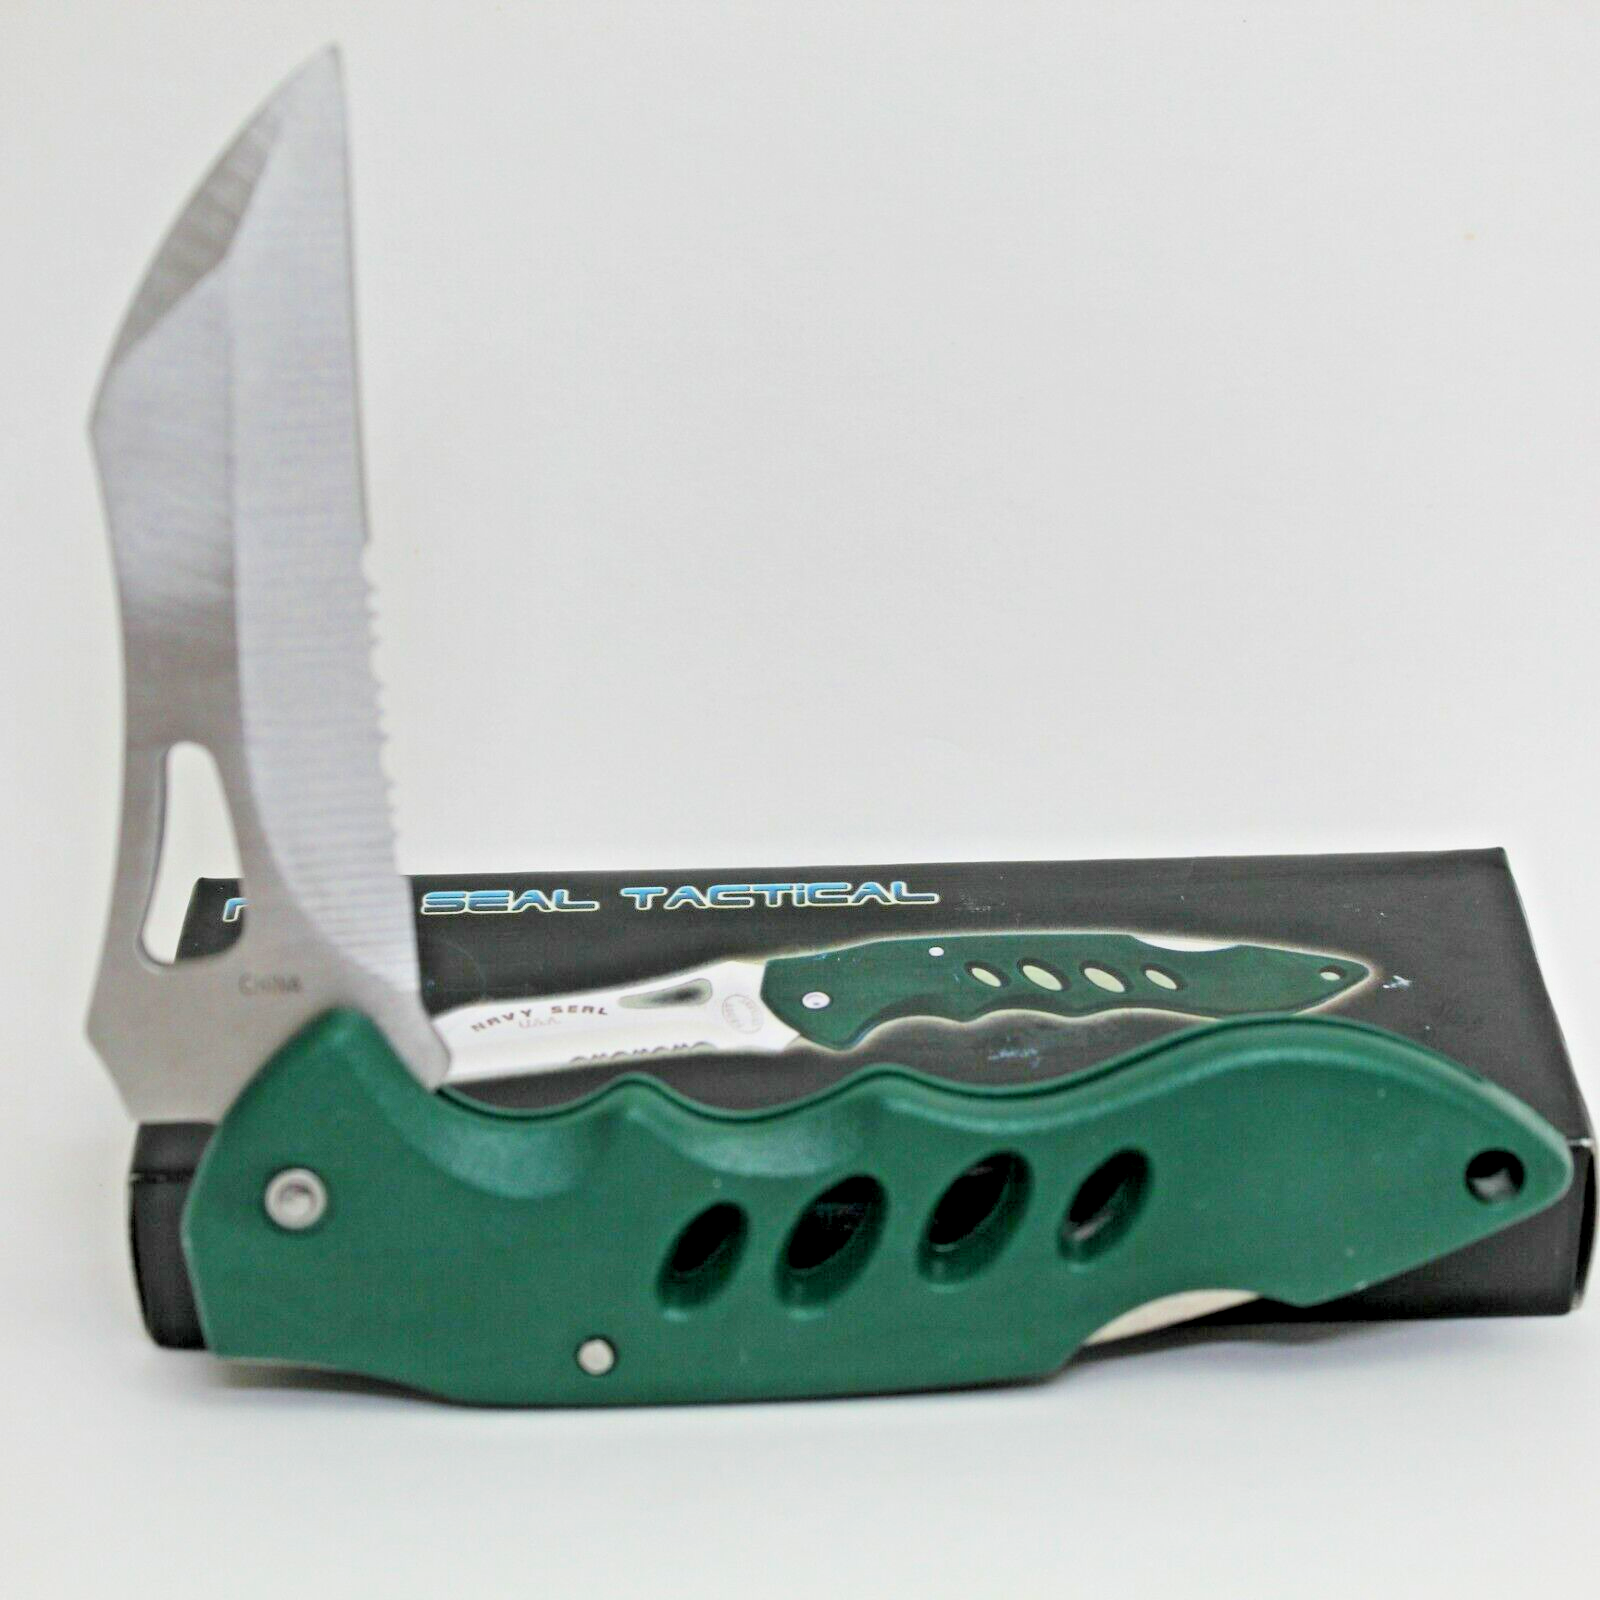 Navy Seal Tactical Folding Pocket Knife New 4.5 inch Blade 16-055D Frost Cutlery - $5.79